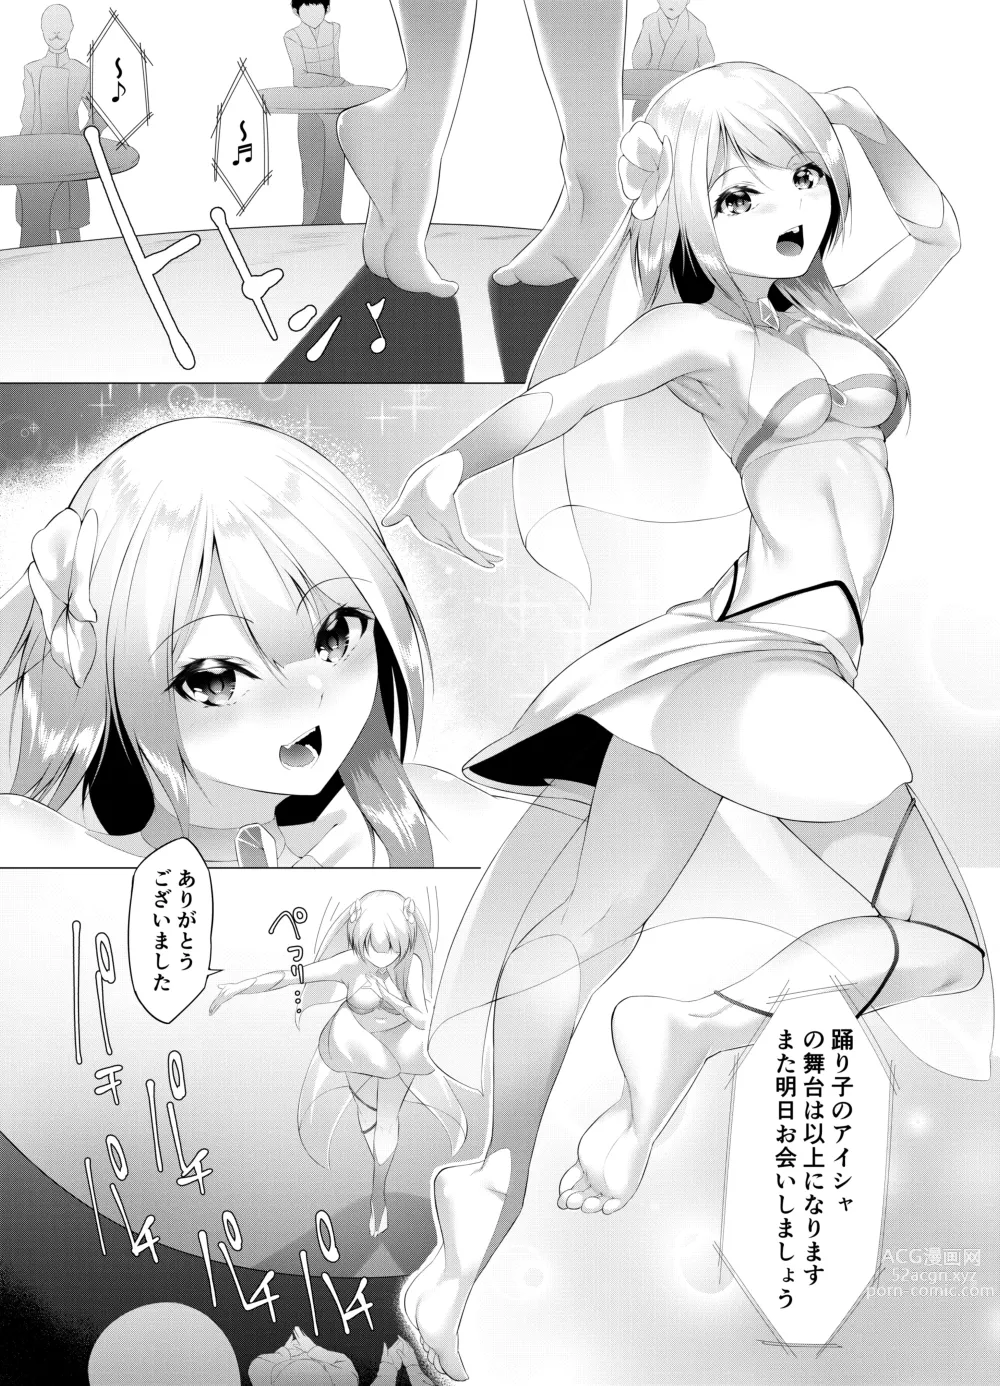 Page 1 of doujinshi 踊り子の秘密